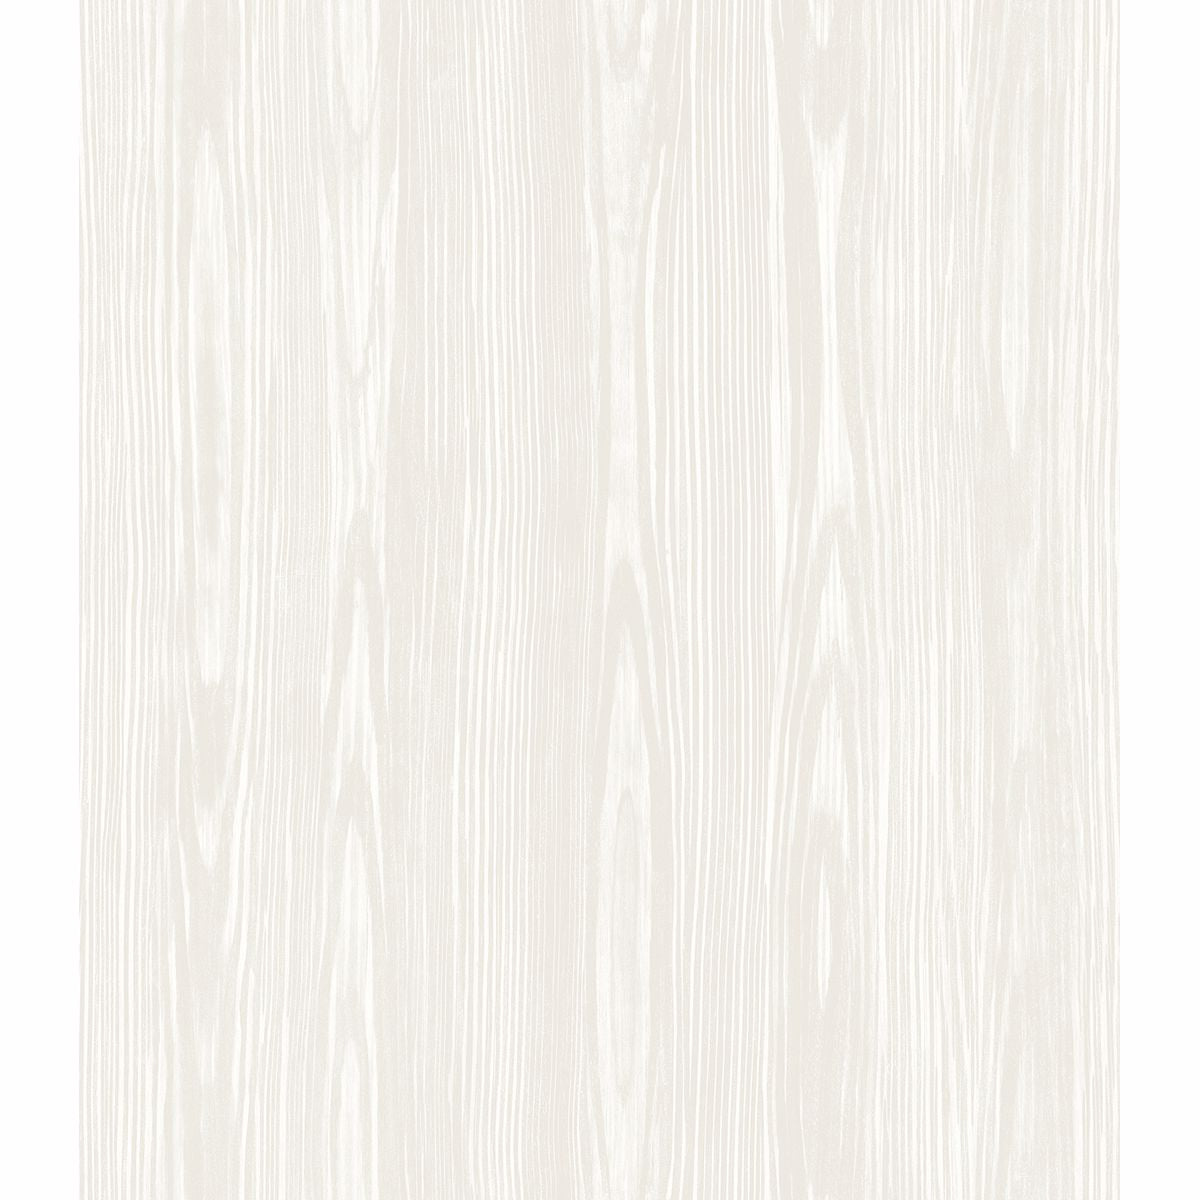 Picture of Illusion Beige Wood Wallpaper